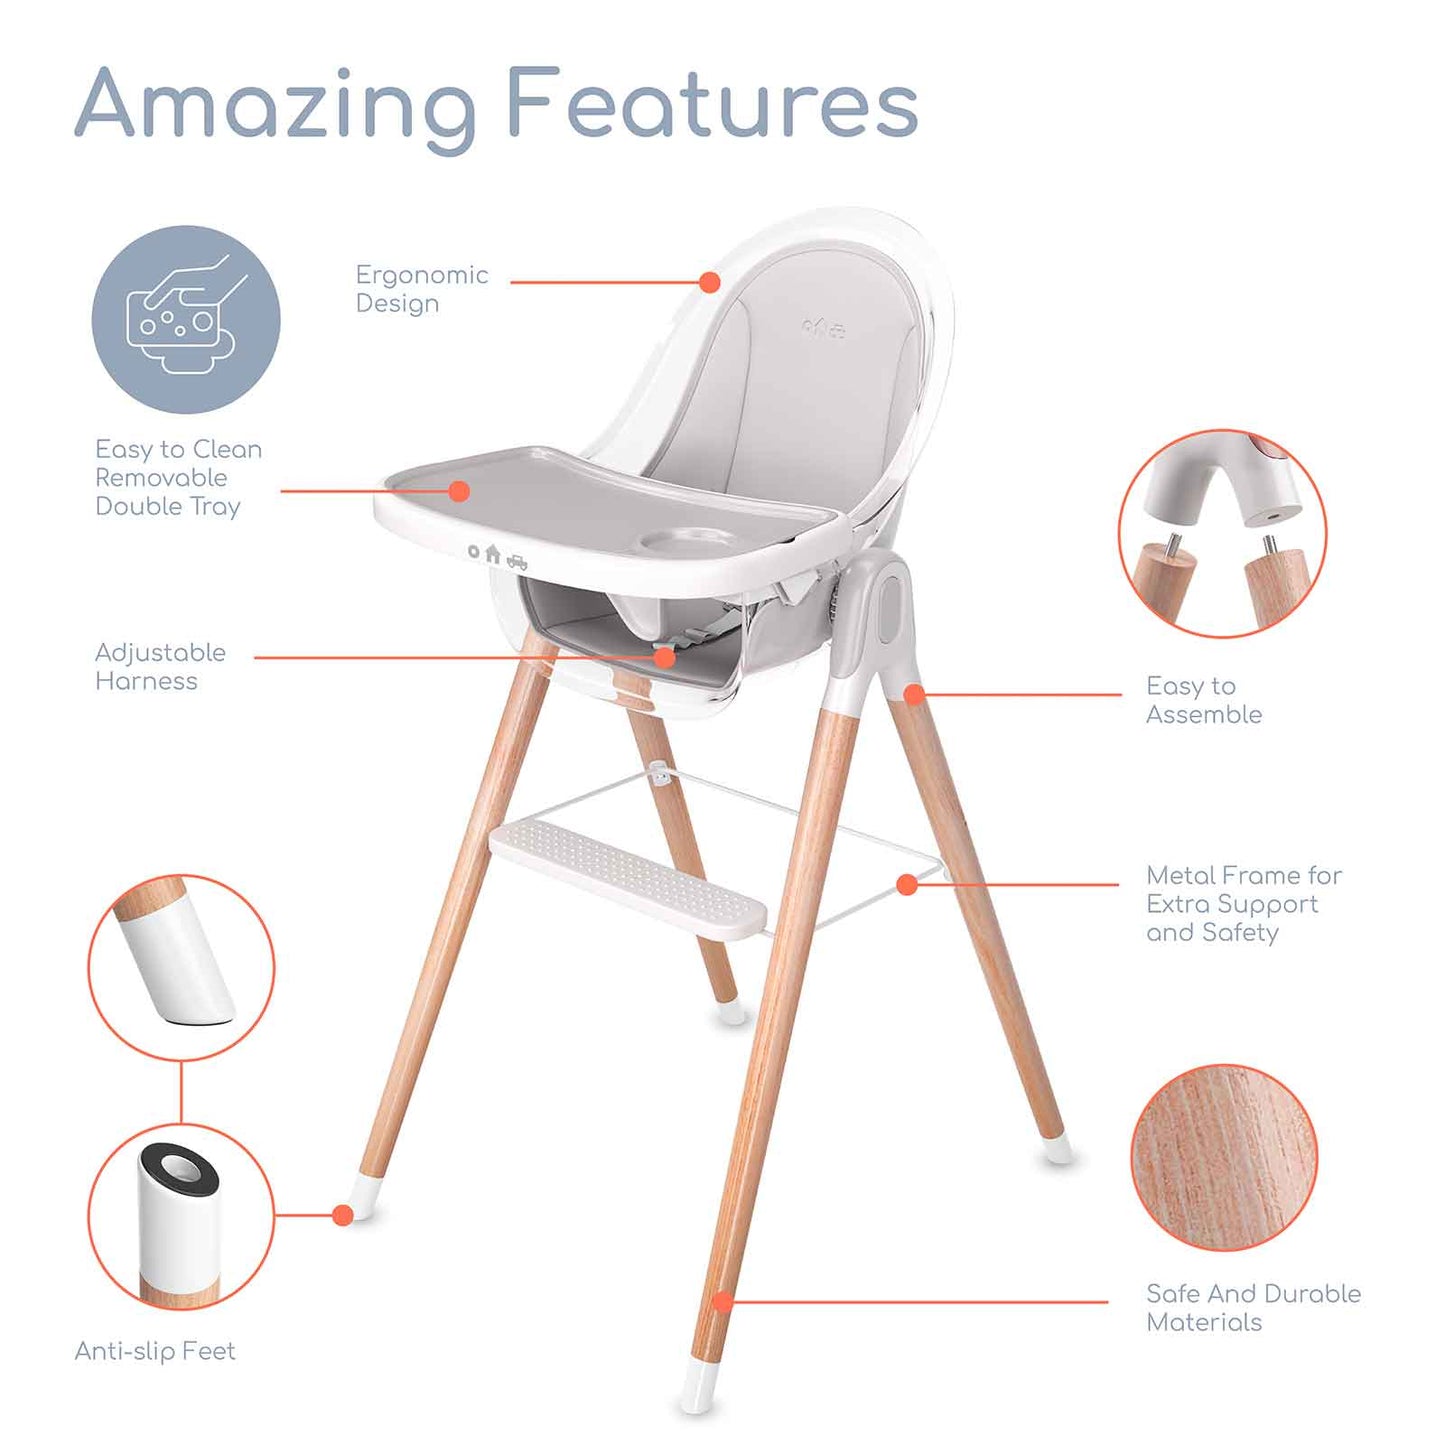 Children of Design 6 in 1 Deluxe High Chair  w/cushion